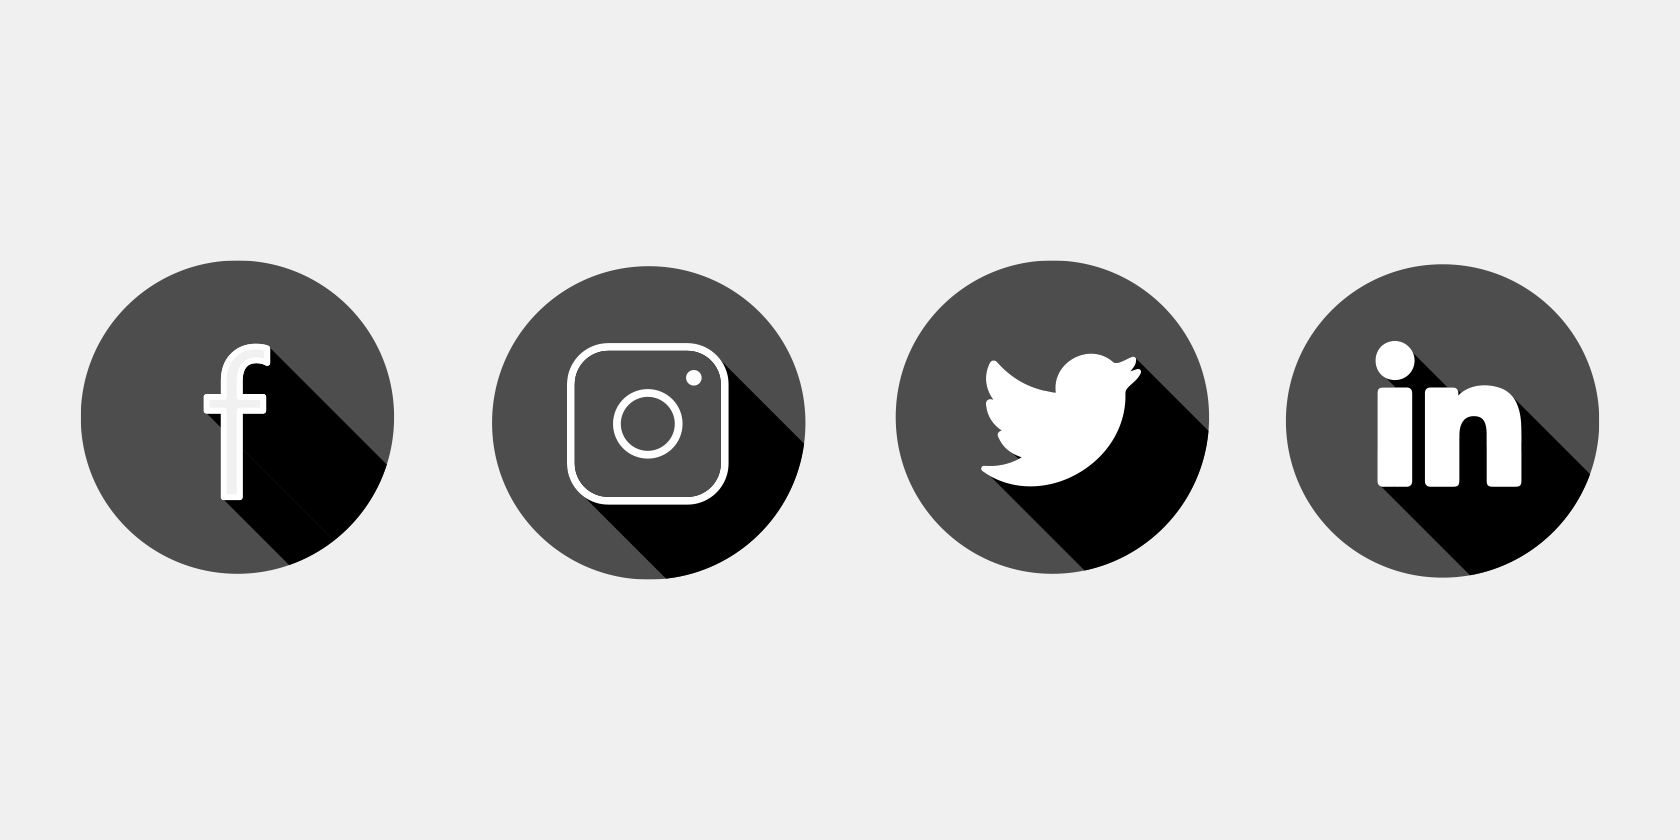 black and white icons of social media platforms